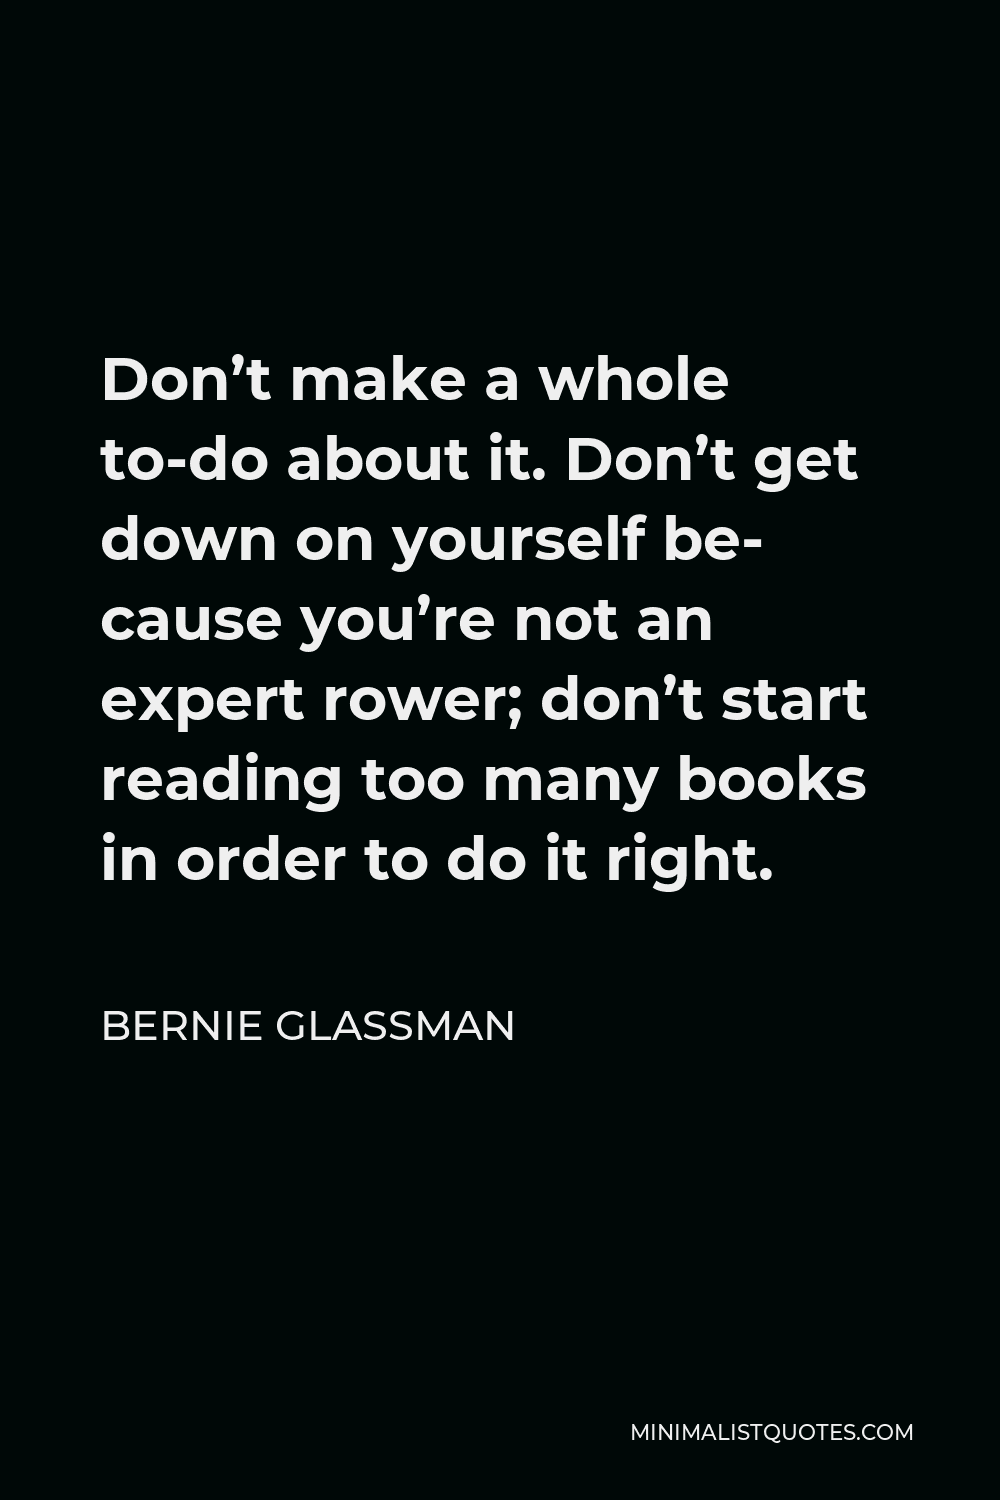 Bernie Glassman Quote - Don’t make a whole to-do about it. Don’t get down on yourself be- cause you’re not an expert rower; don’t start reading too many books in order to do it right.